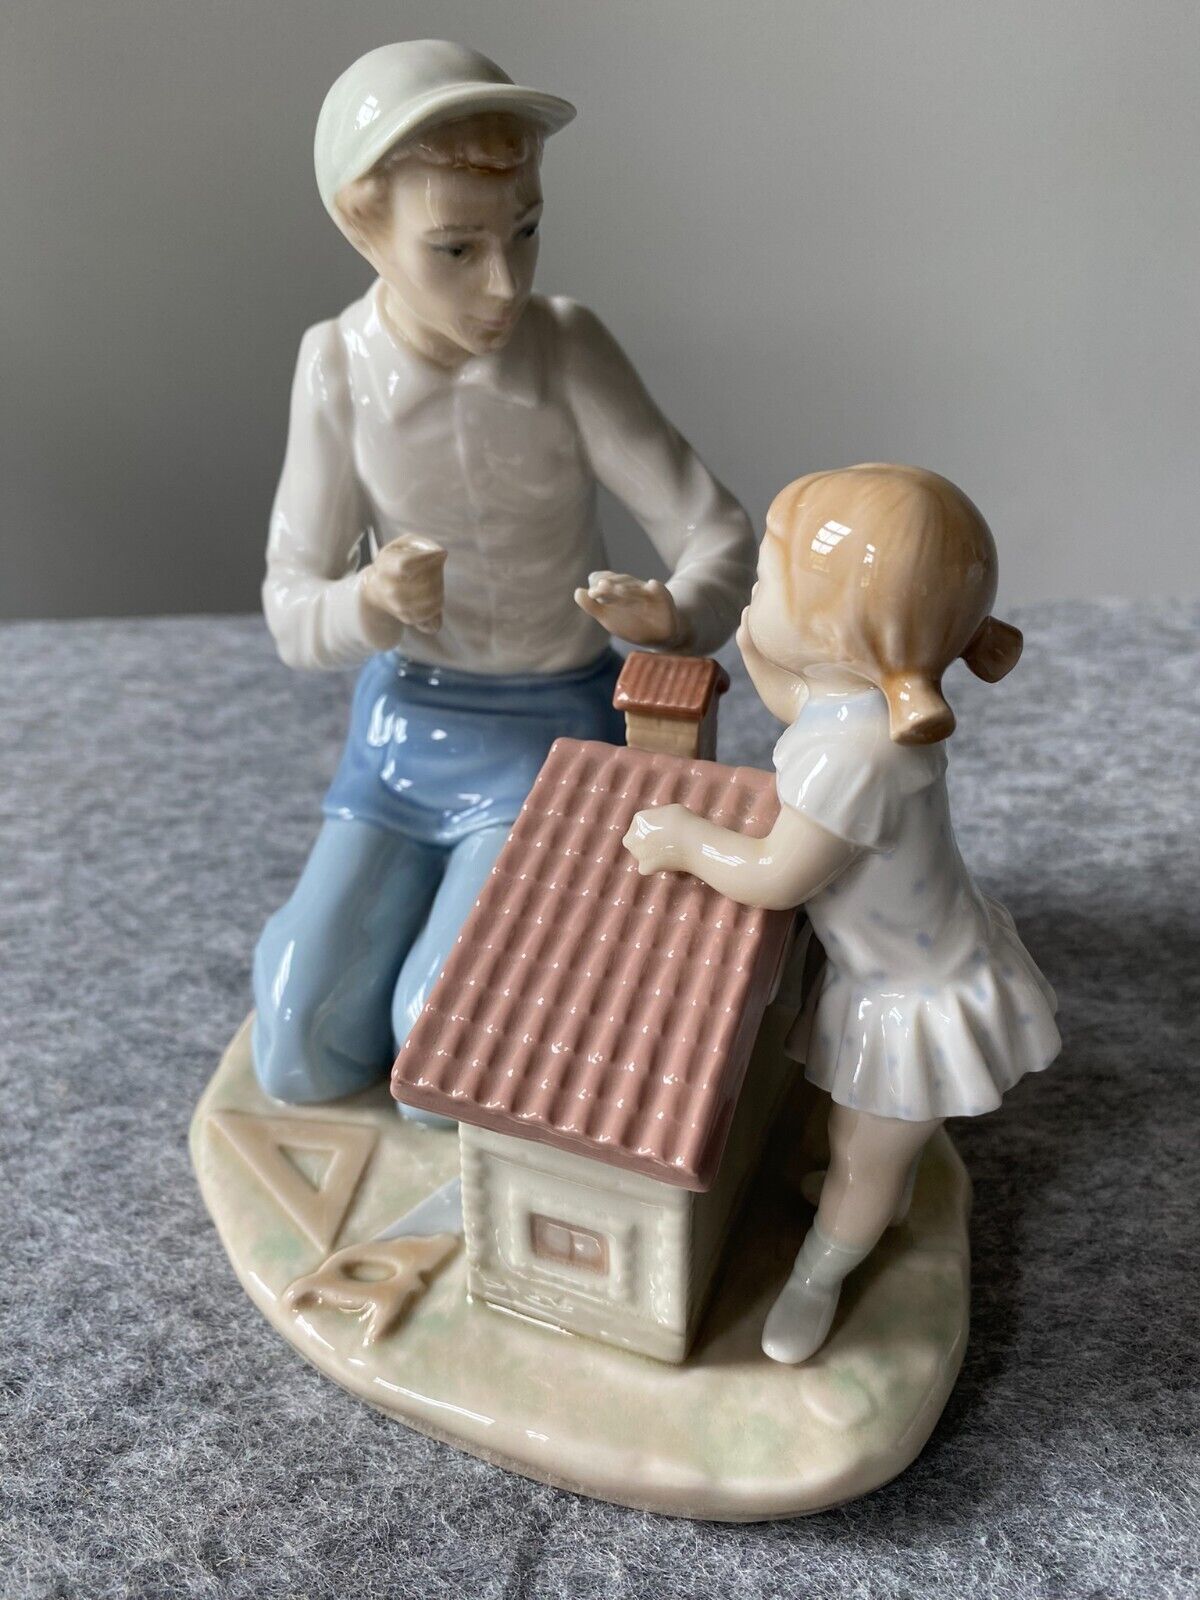 1982 Lladro #5139 A New Doll House - Retired - Looks Great - Needs Minor Repair